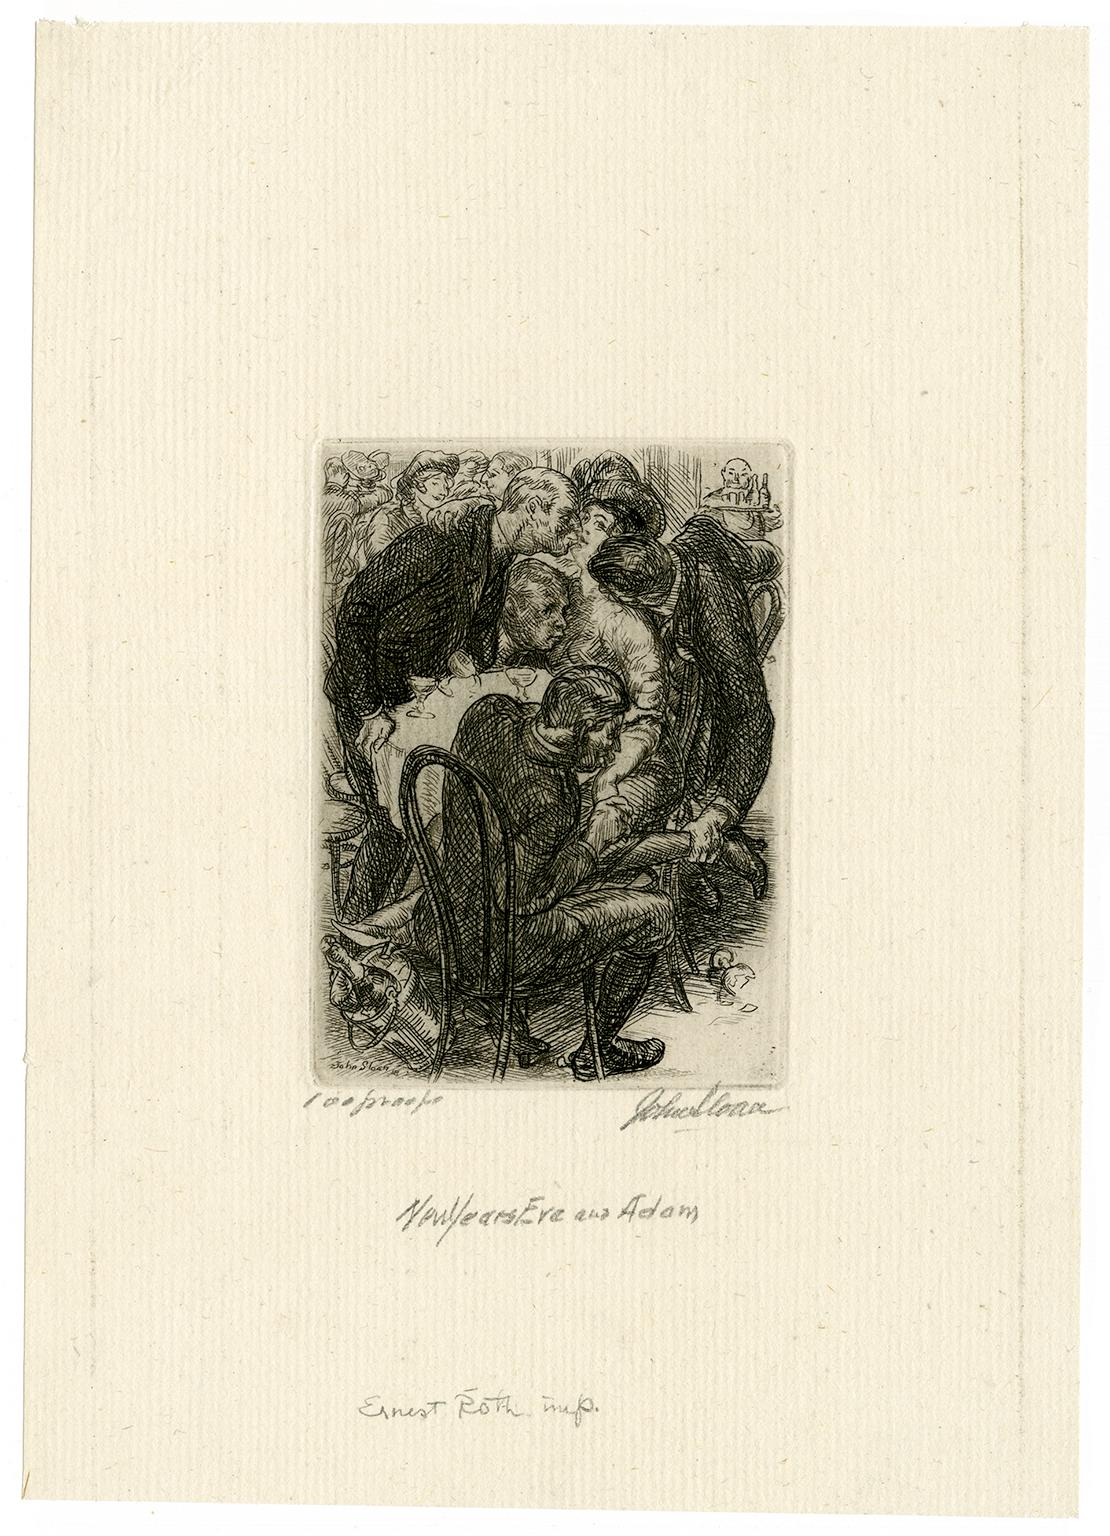 New Year’s Eve and Adam - Print by John Sloan